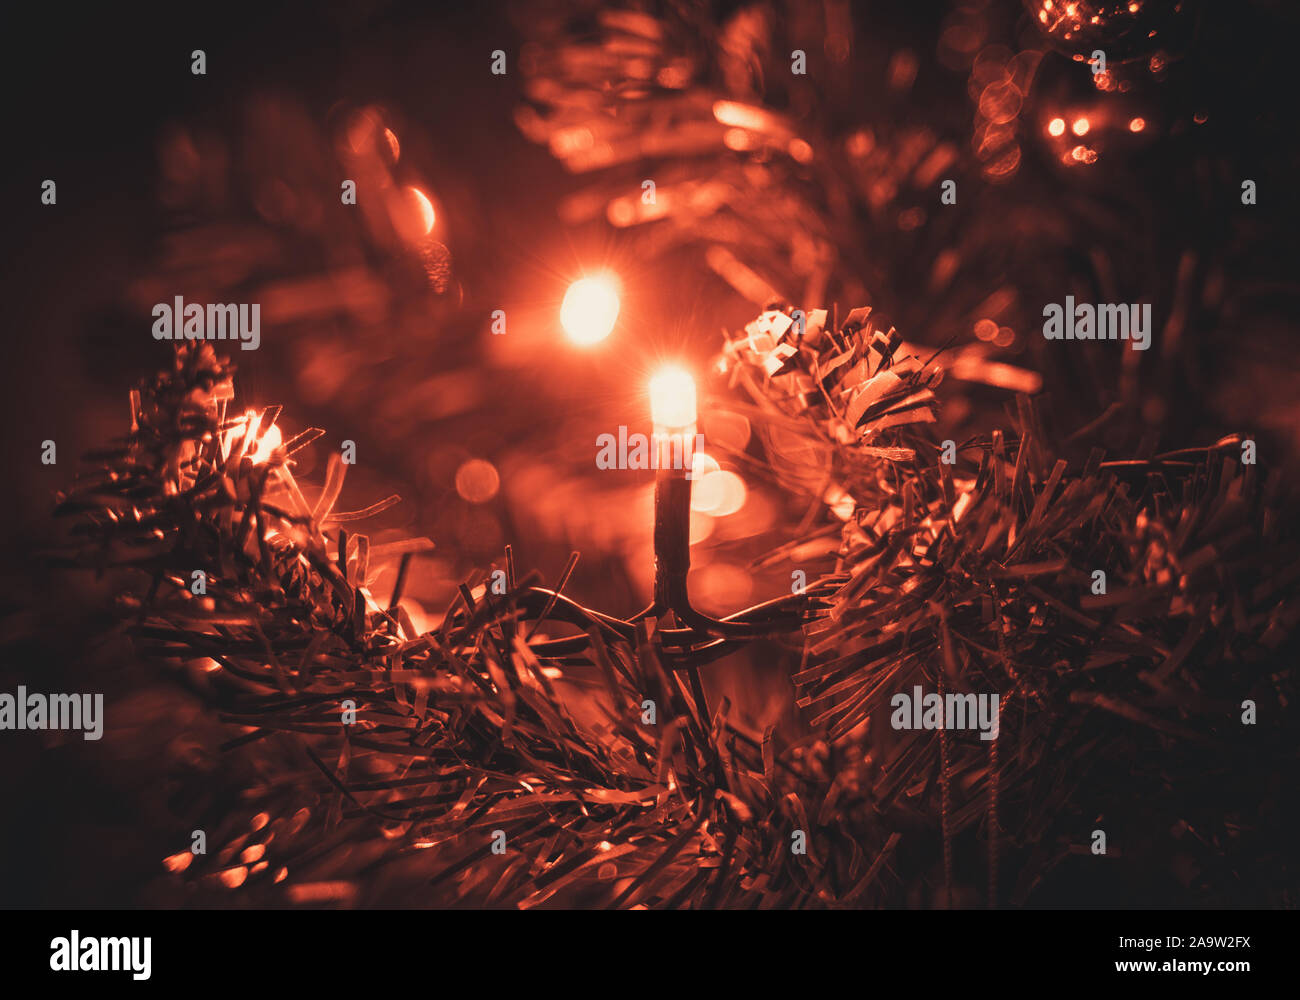 Red Christmas Light shining on a Christmas tree. Illuminate the branches. Blurry background. Stock Photo